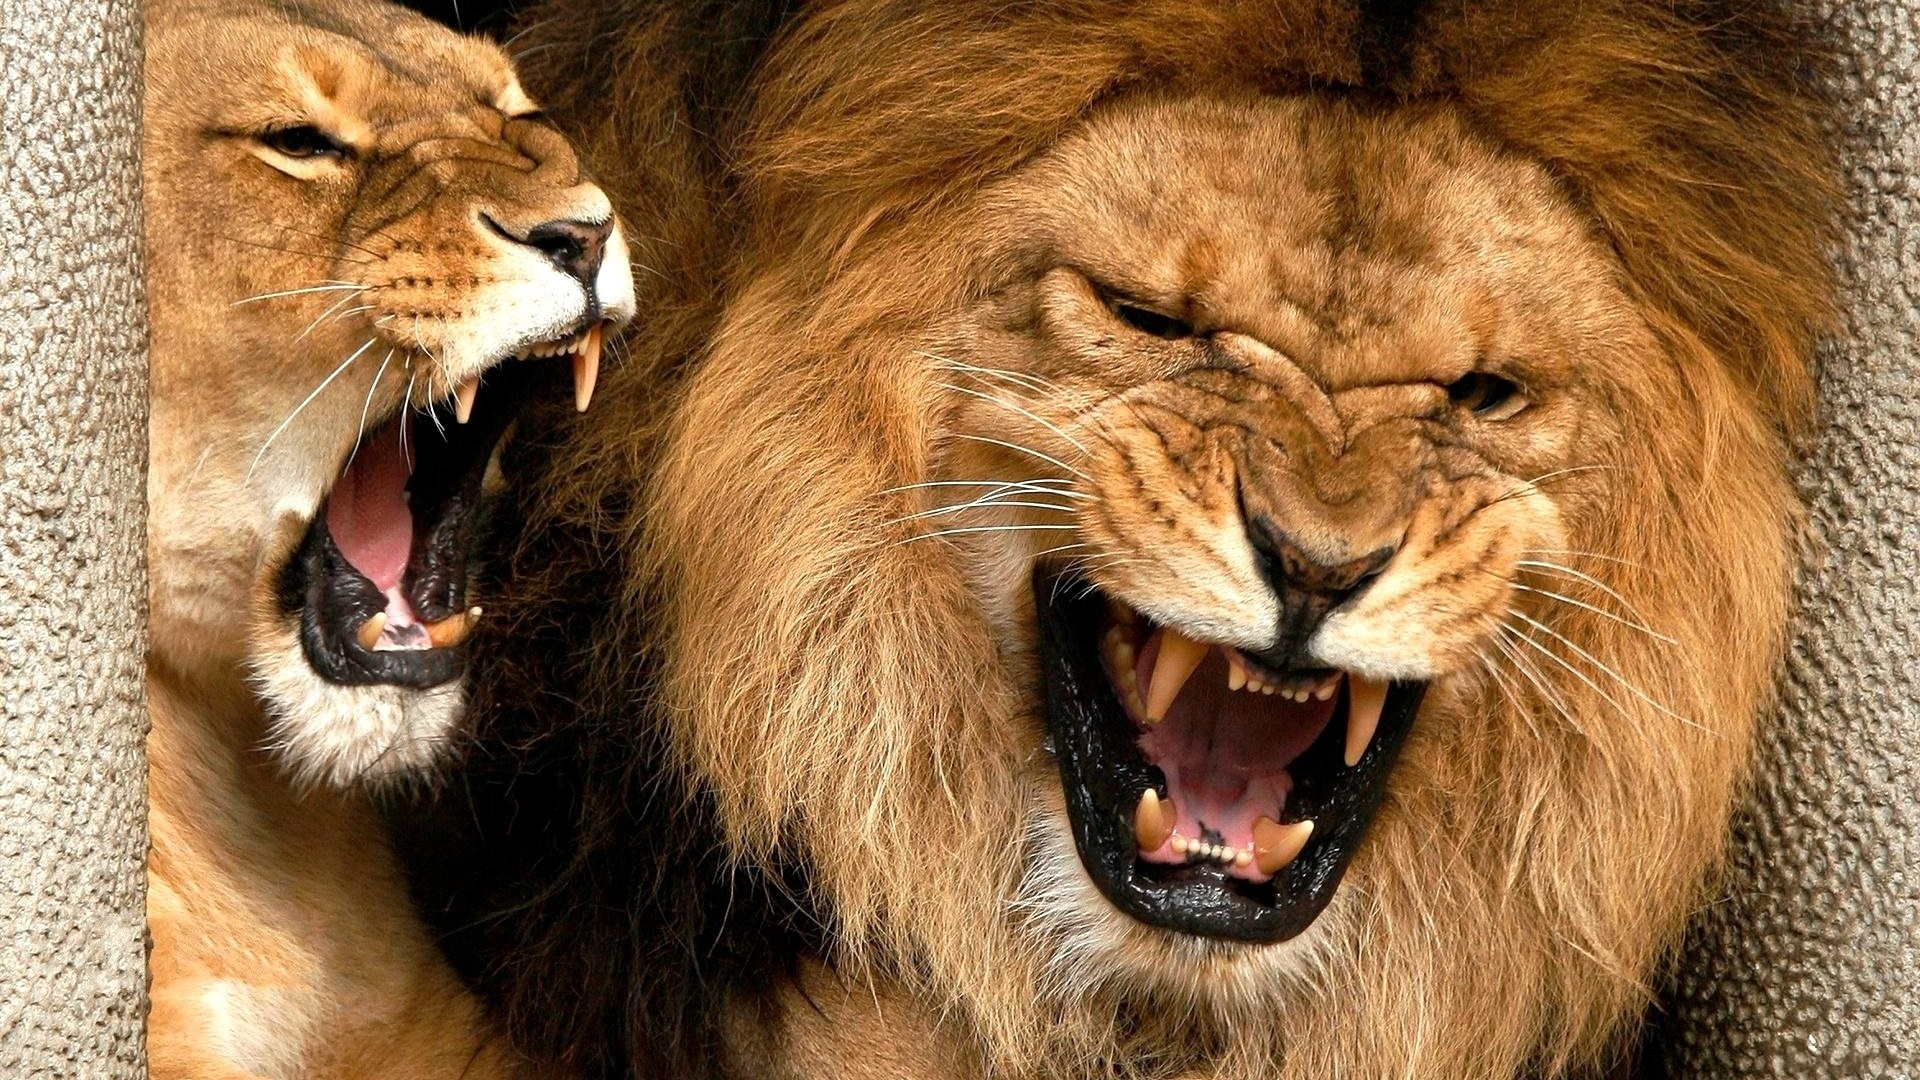 Wallpaper Lion, Lioness, Mane, Teeth, Anger, Aggression , HD Wallpaper & Backgrounds